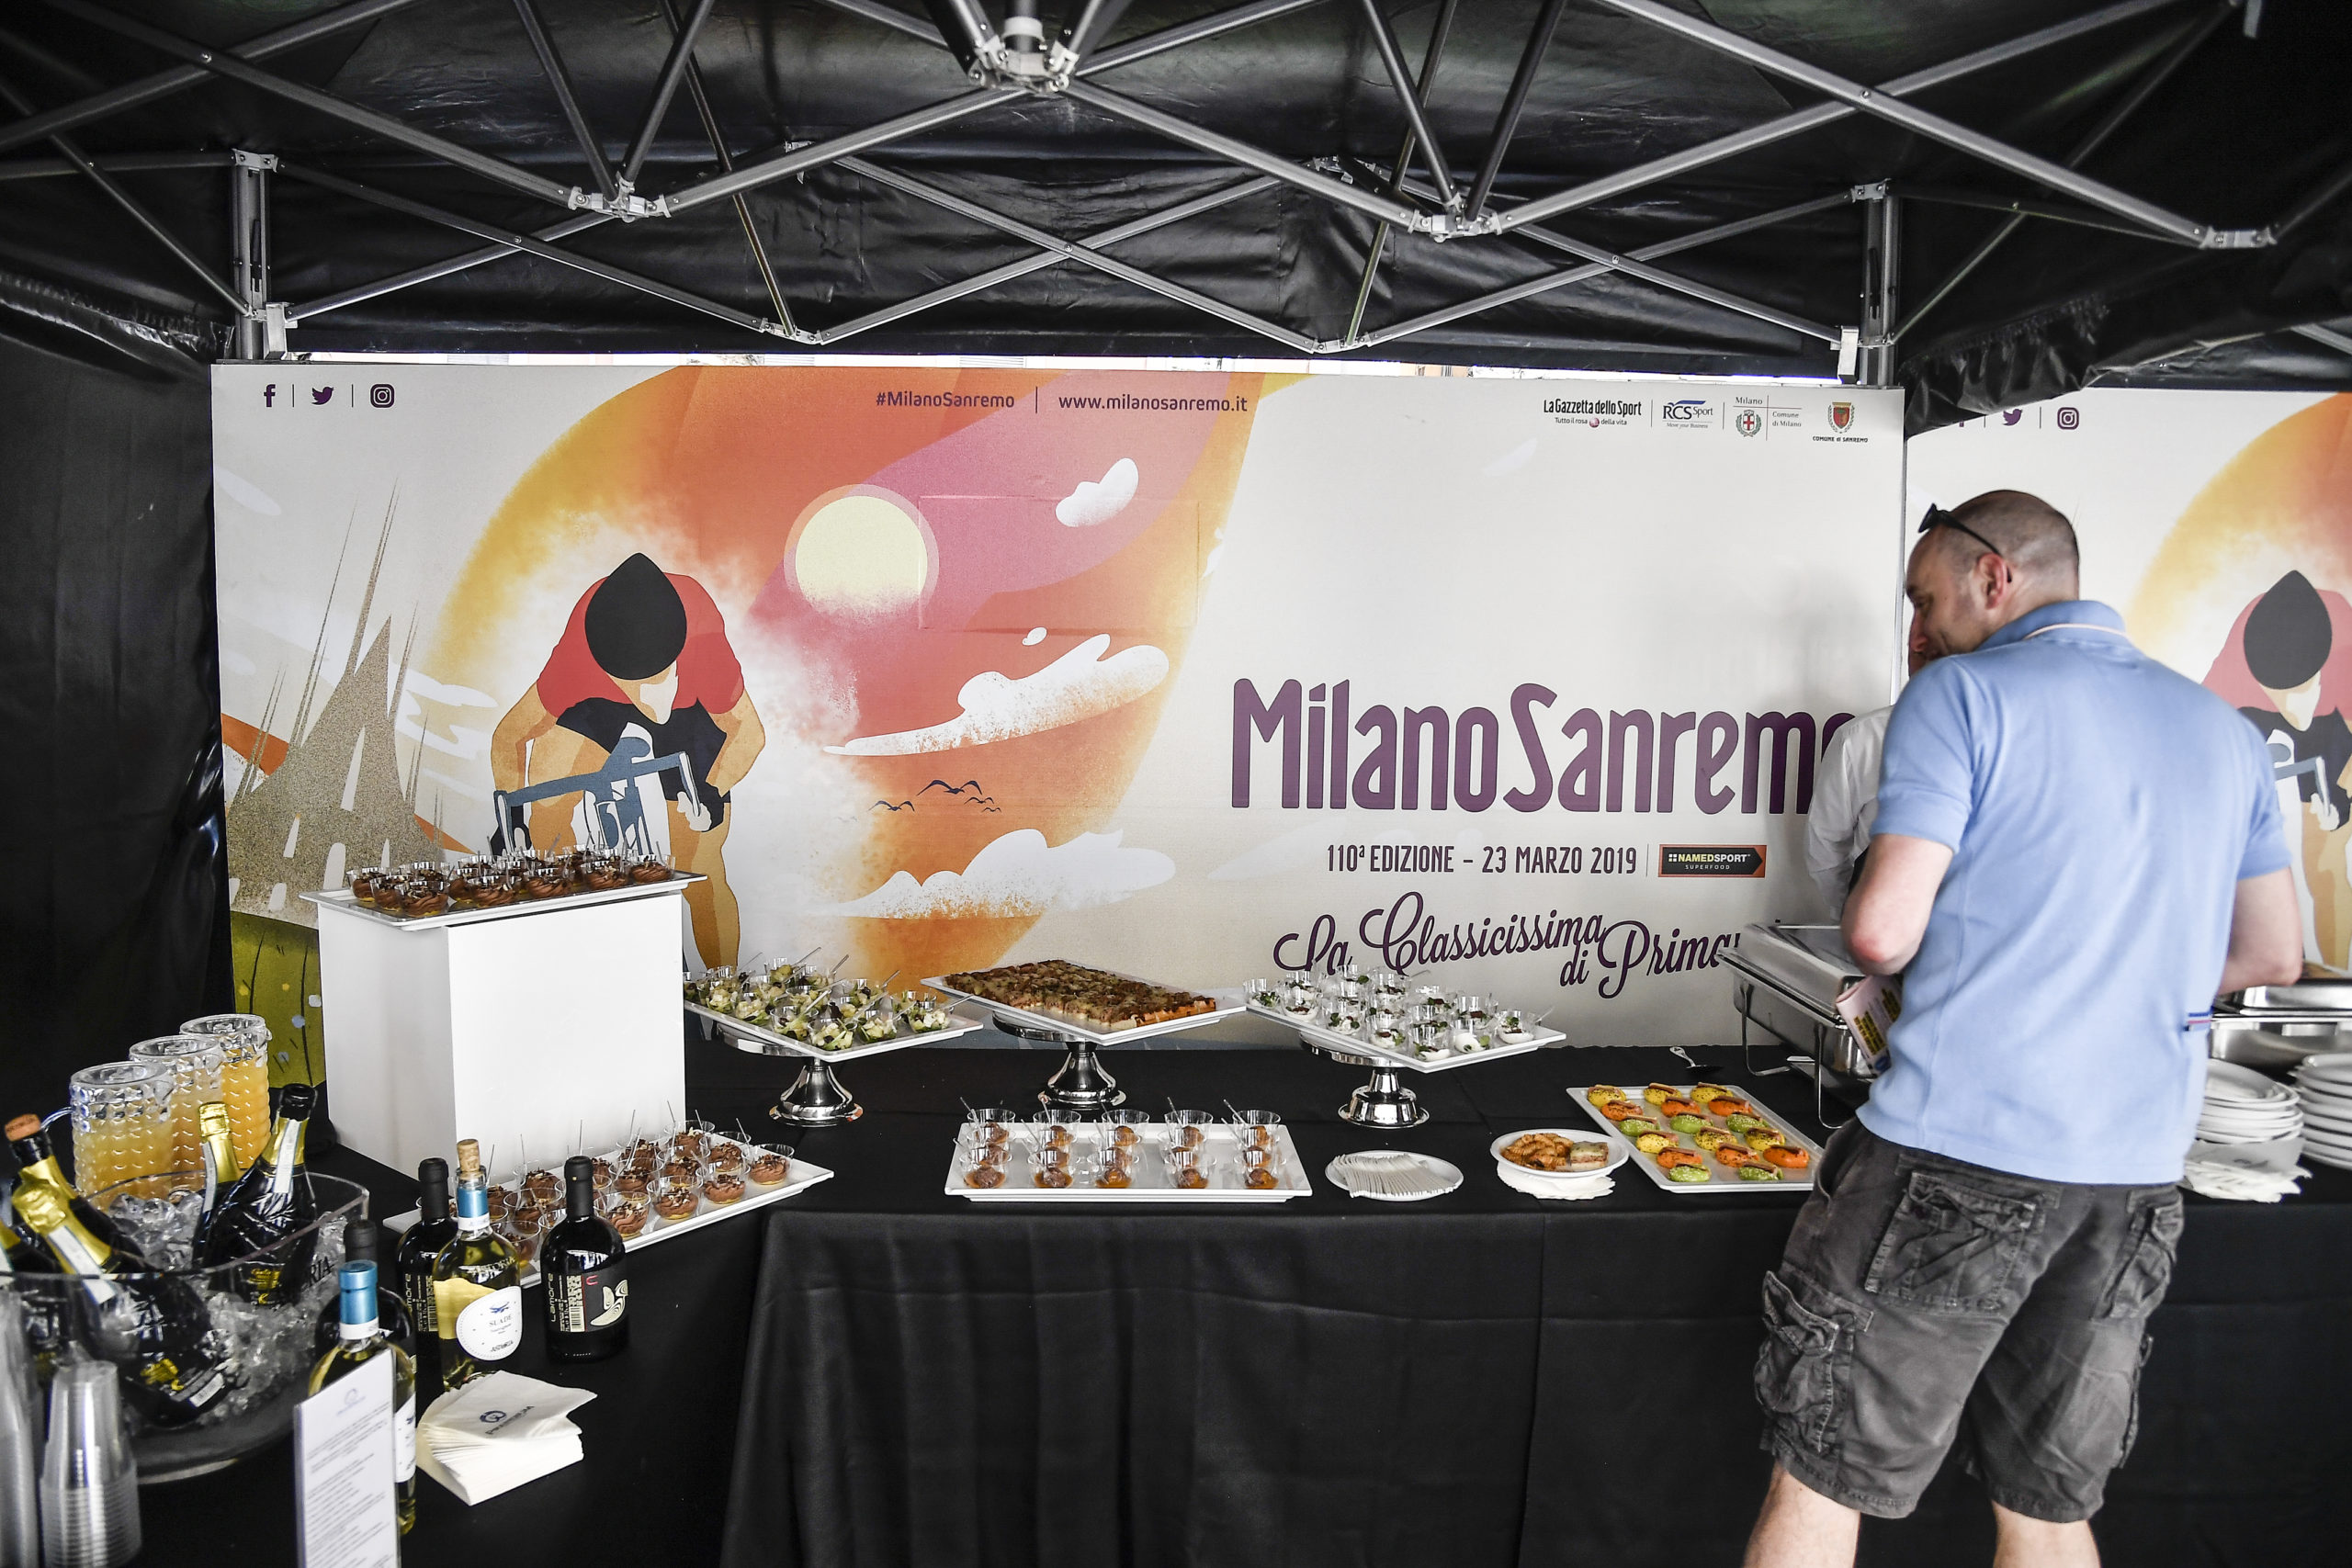 Find out Hospitality Service of Milano Sanremo